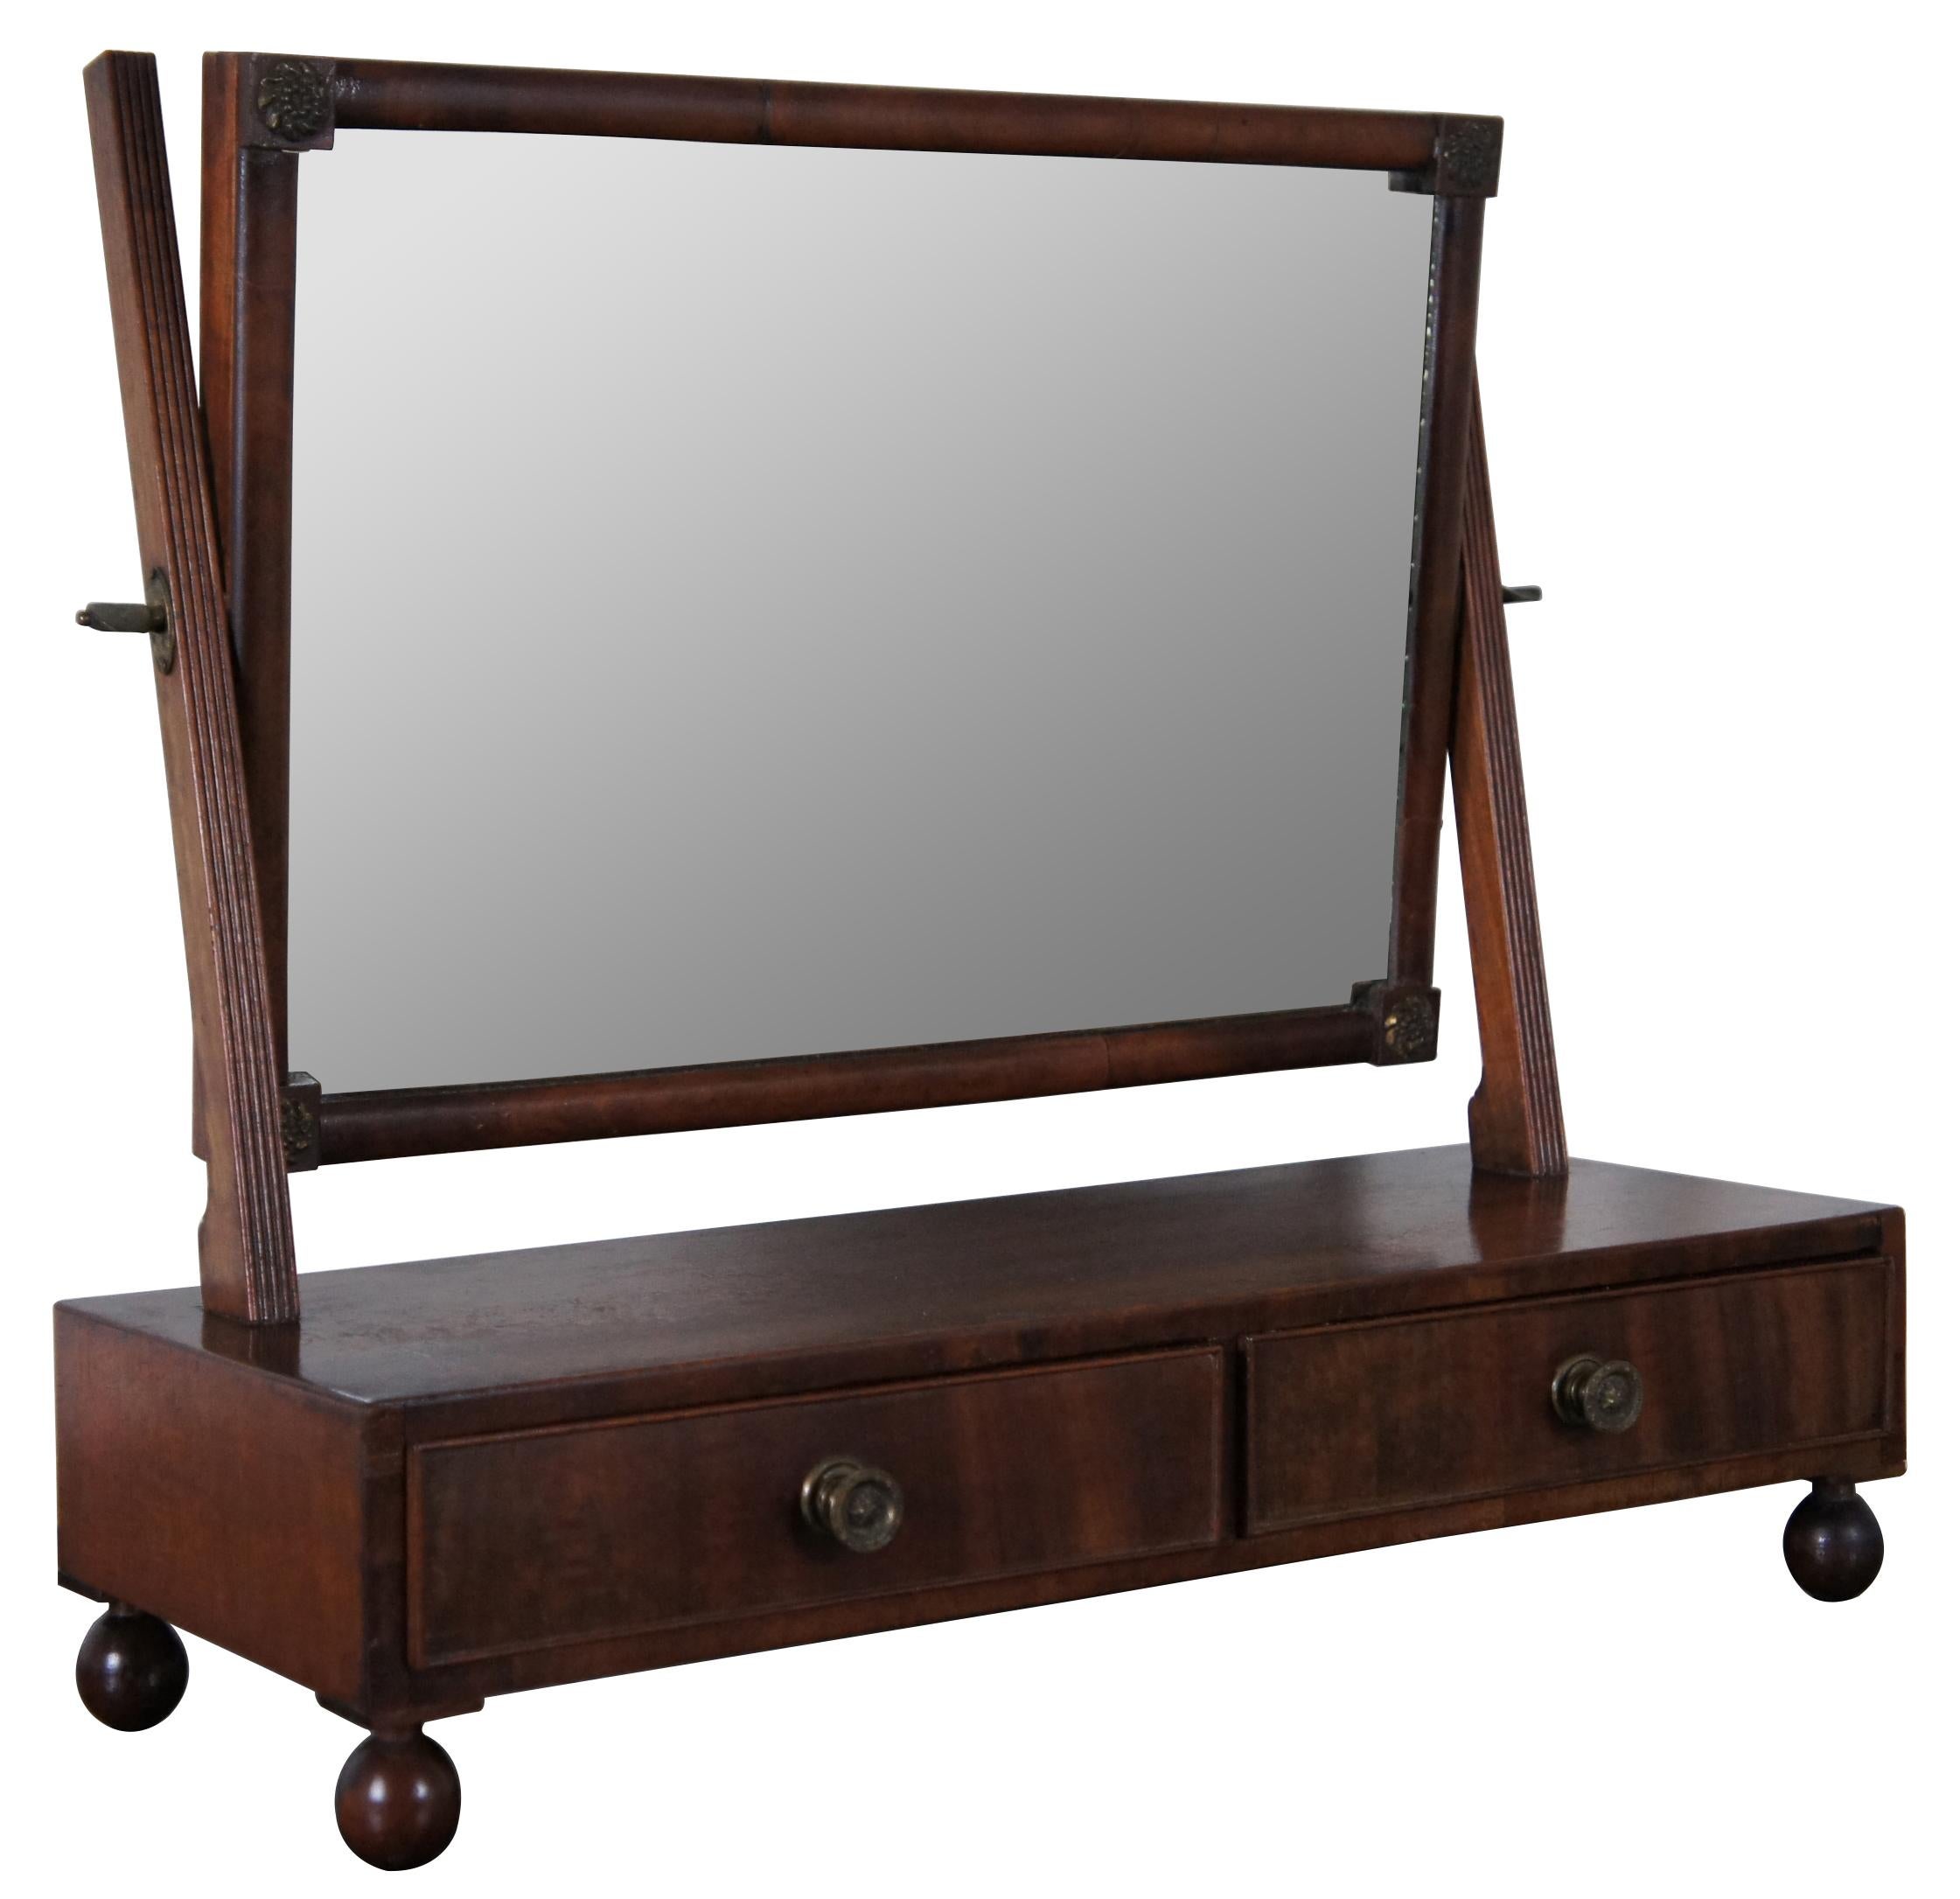 An exquisite Sheraton Period shaving stand. A rectangular form made from mahogany with two drawers over ball feet and swivel top mirror. Includes hand dovetailing, ornate brass hardware and flame mahogany front. 

Measures: 20.5” x 7.75” x 18.25”